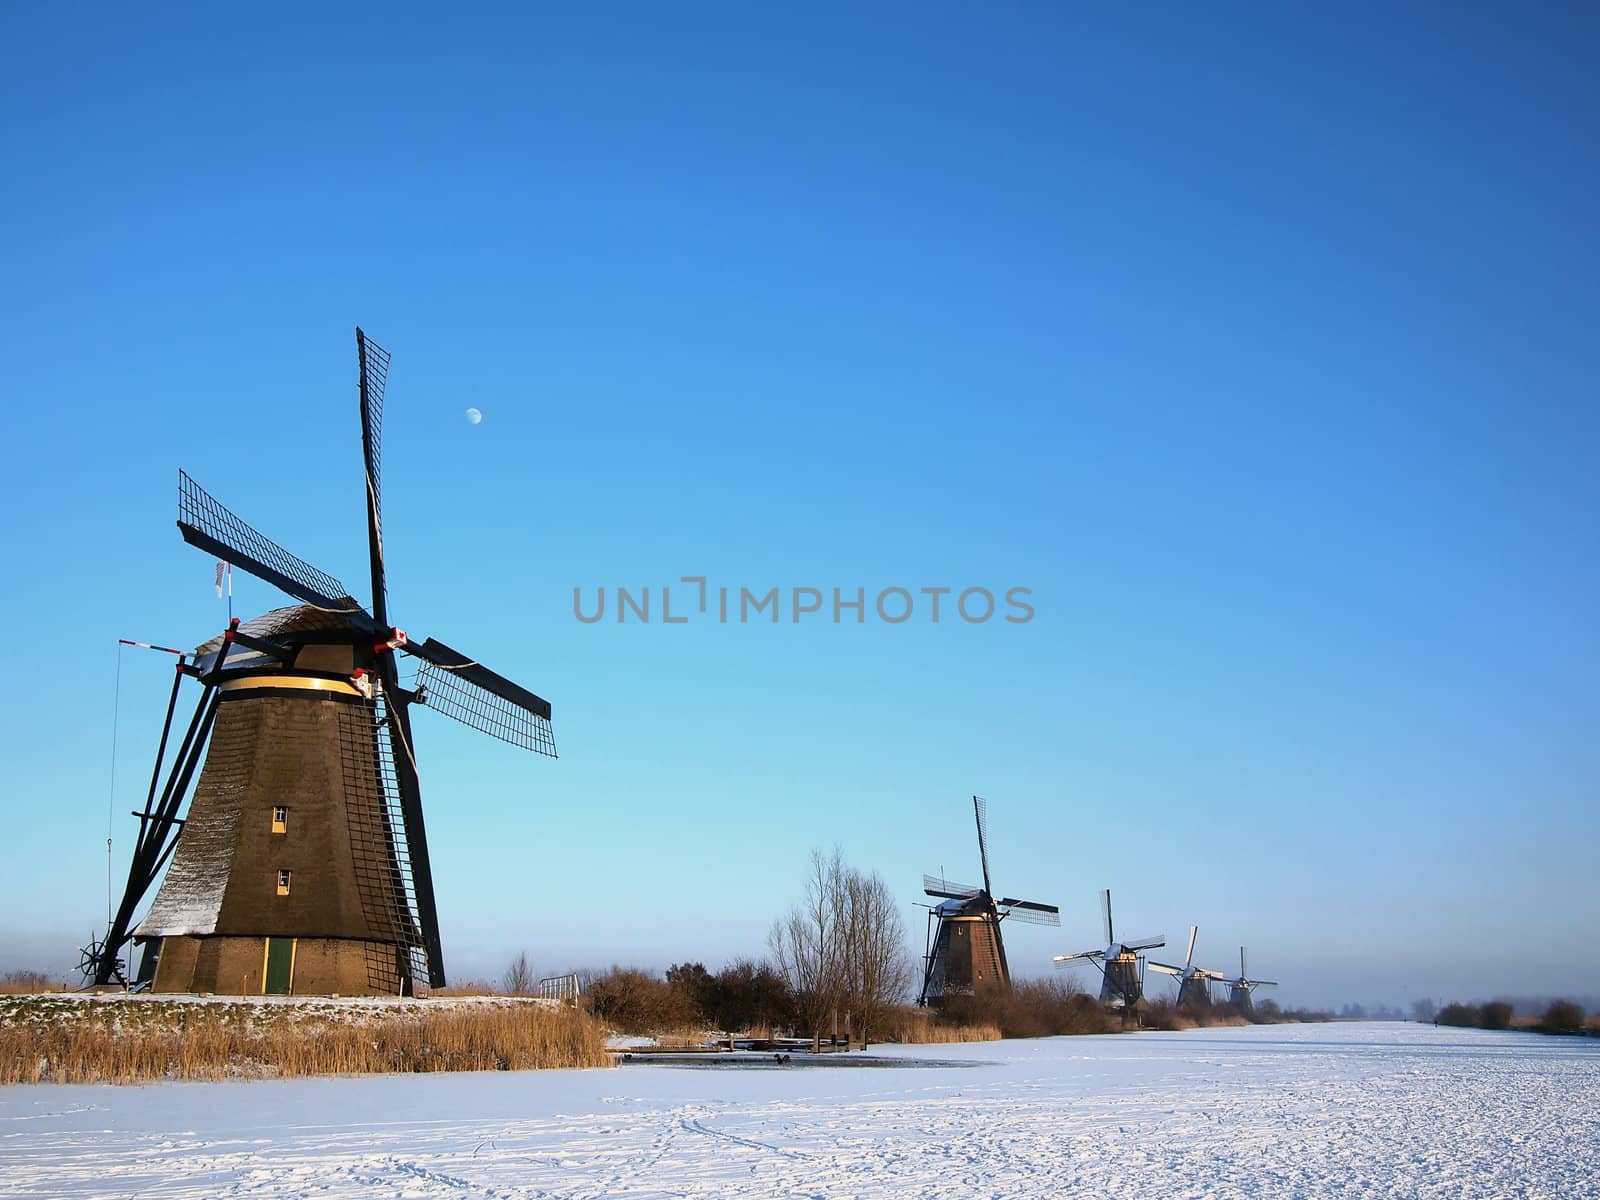 The famous windmills at the Unesco World Heritage Site Kinderdijk in the Netherlands along a frozen canal in winter.